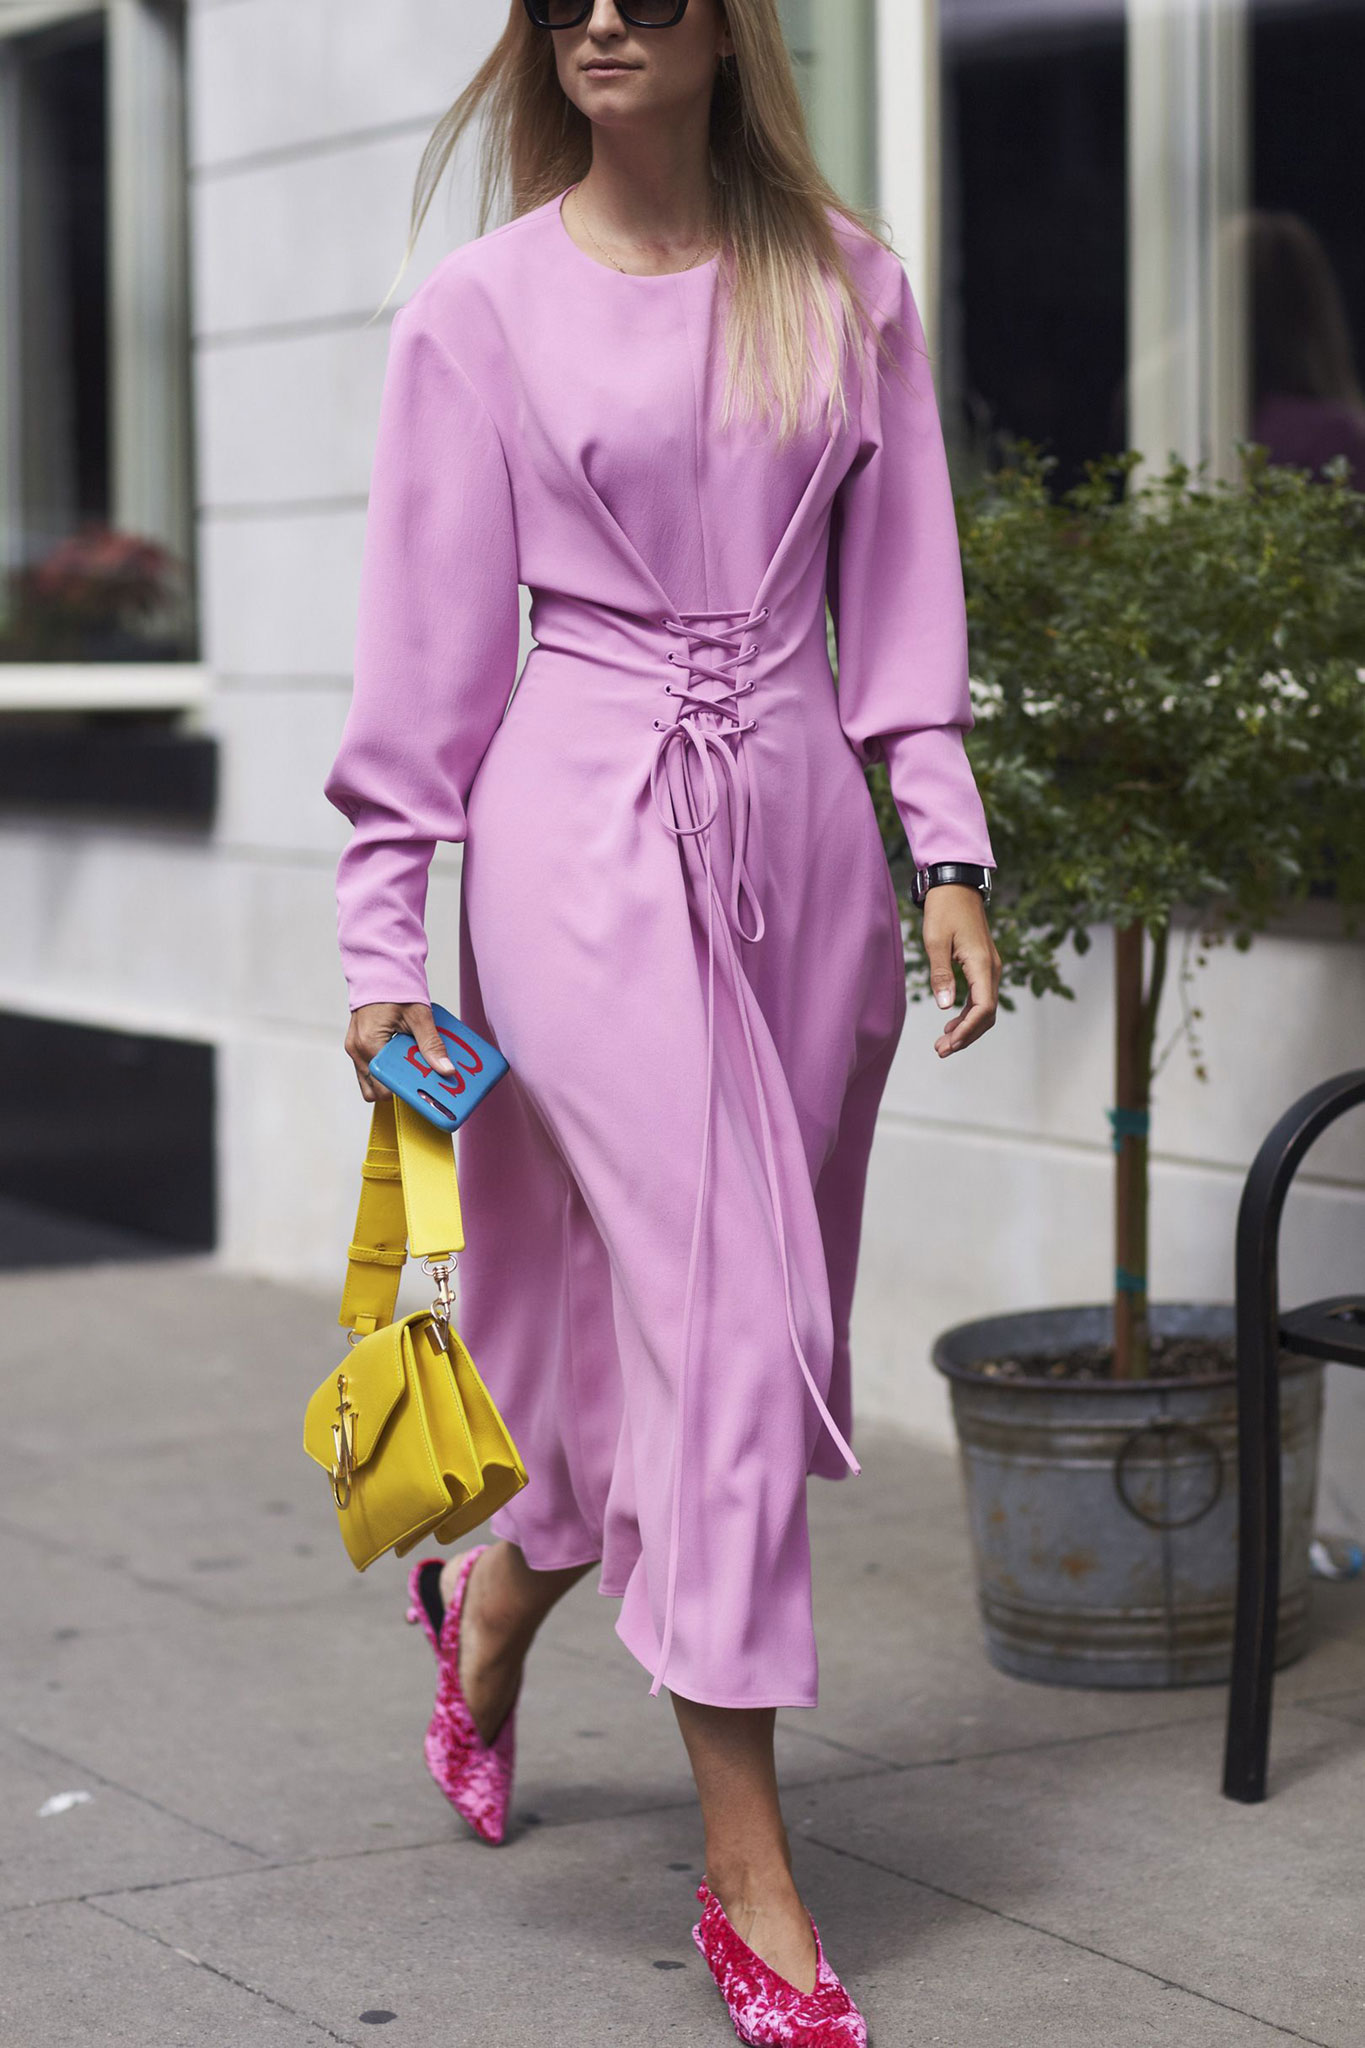 How to Wear Lavender Before Spring // Notjessfashion.com // Lavender dress, street style fashion, fashion week street style